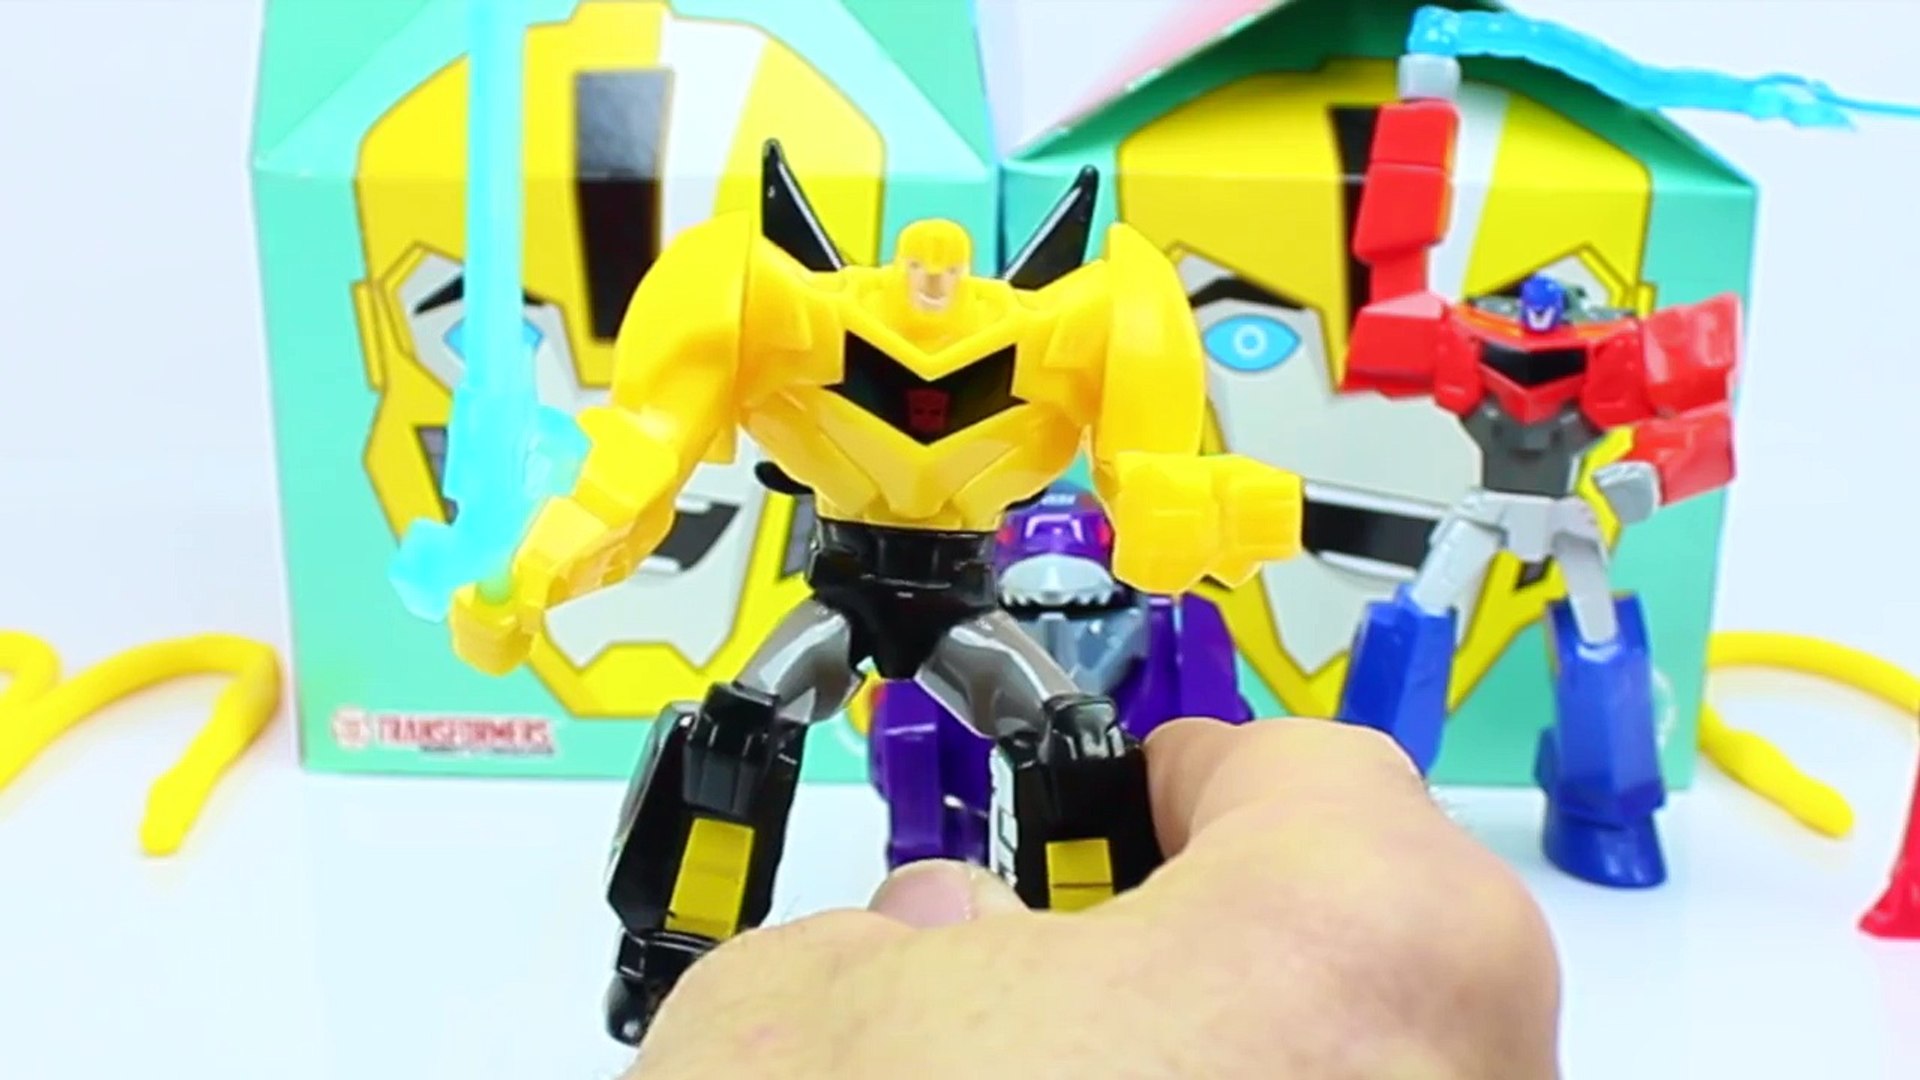 TRANSFORMERS Robots in Disguise McDonalds Happy Meal Toy ...